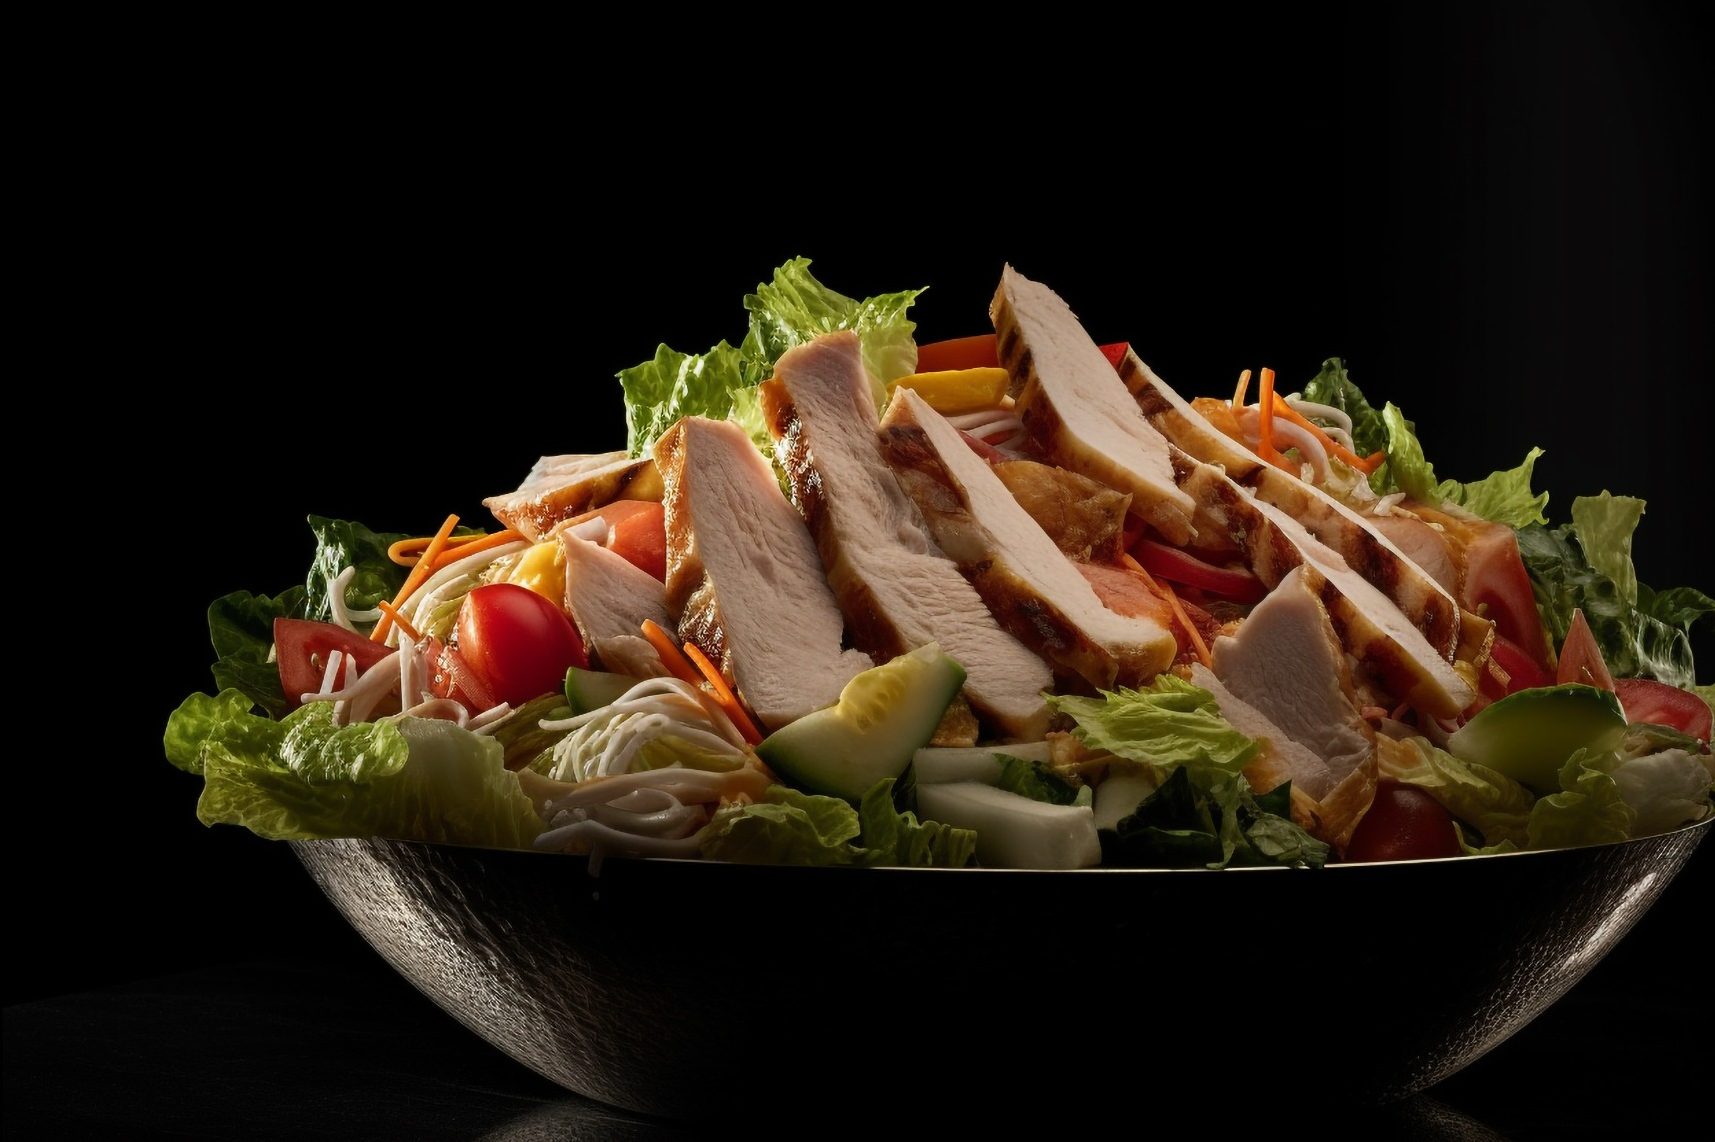 Discover Anas PROTEIN SALAD, a hearty selection featuring chicken, beef, turkey, falafel, and mix (chicken & beef). Explore our menu for a protein-packed salad experience – each bite is a wholesome delight that satisfies your taste buds!